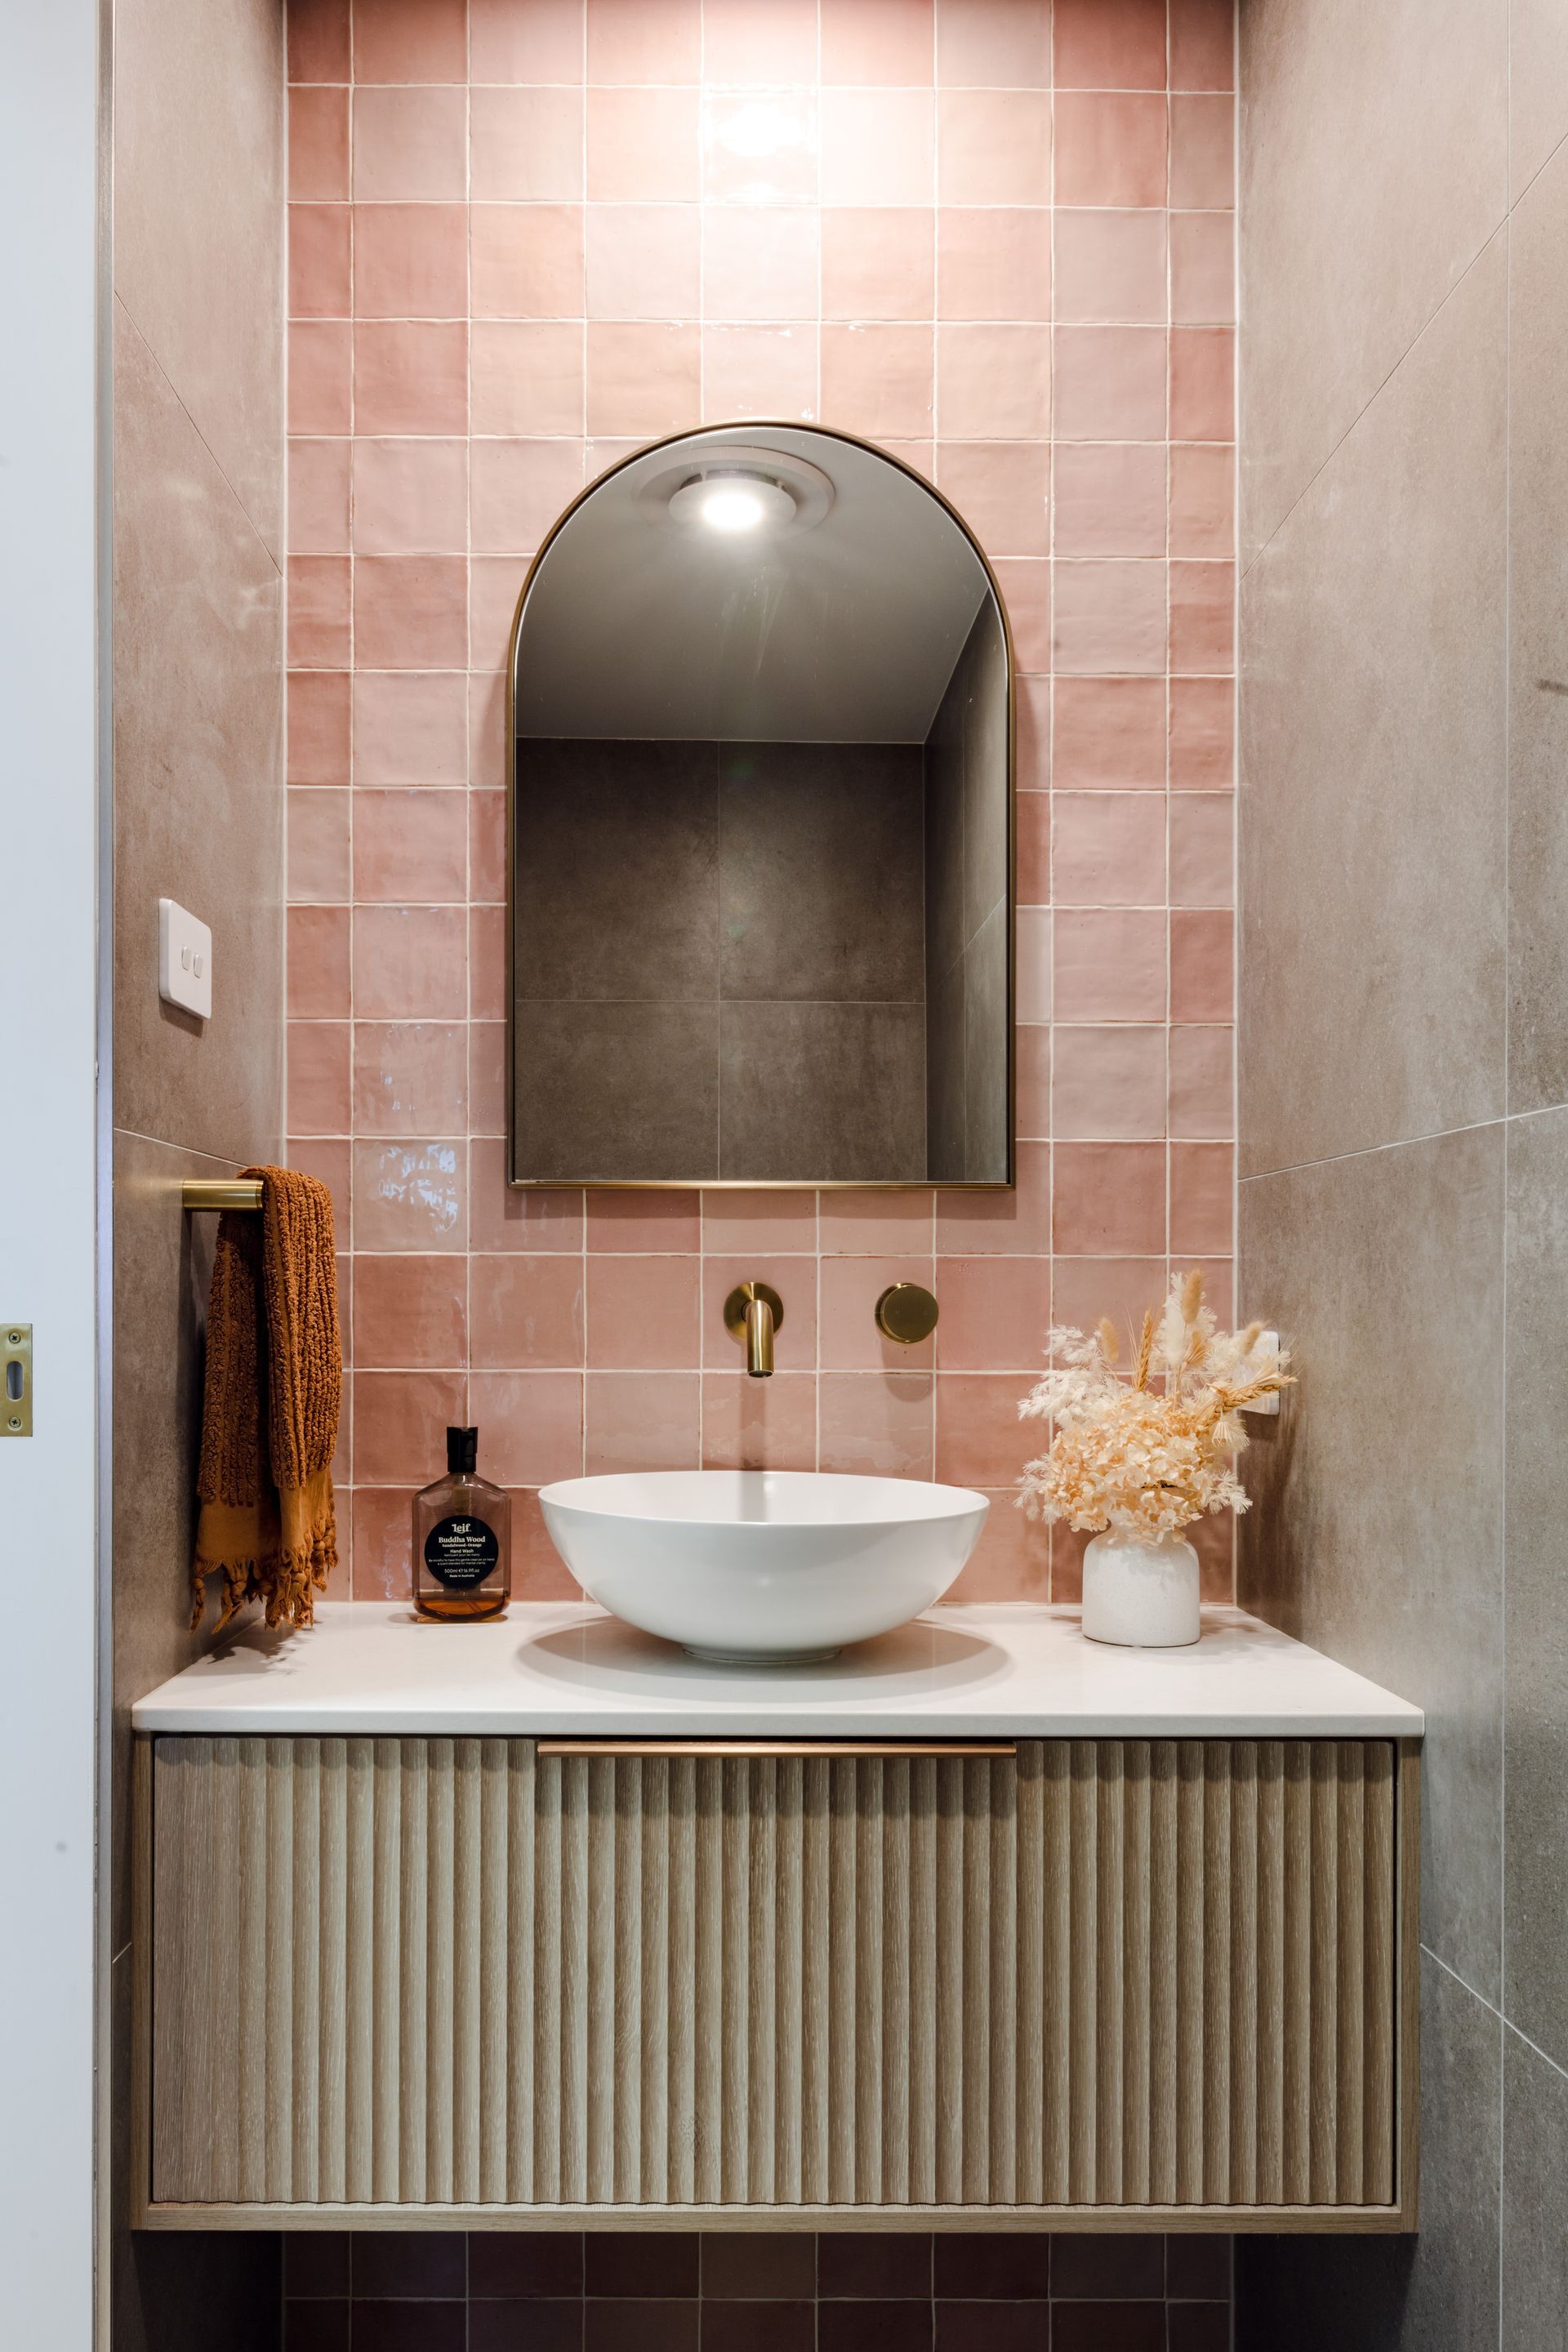 Modern bathroom with pink tiles -  Bathroom Renovations in Port Macquarie, NSW